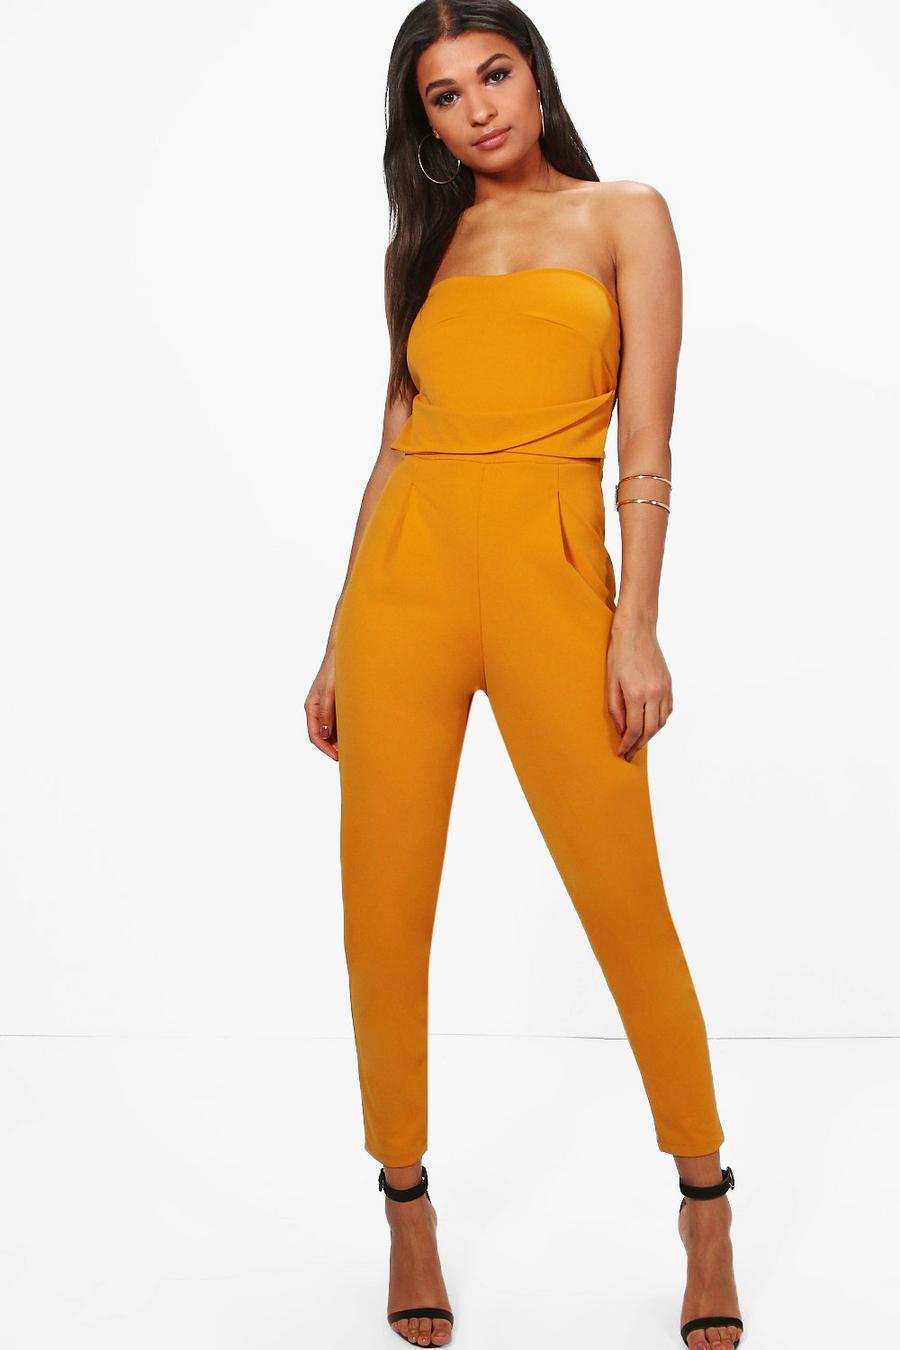 Ochre Bandeau Tailored Woven Slim Fit Jumpsuit image number 1